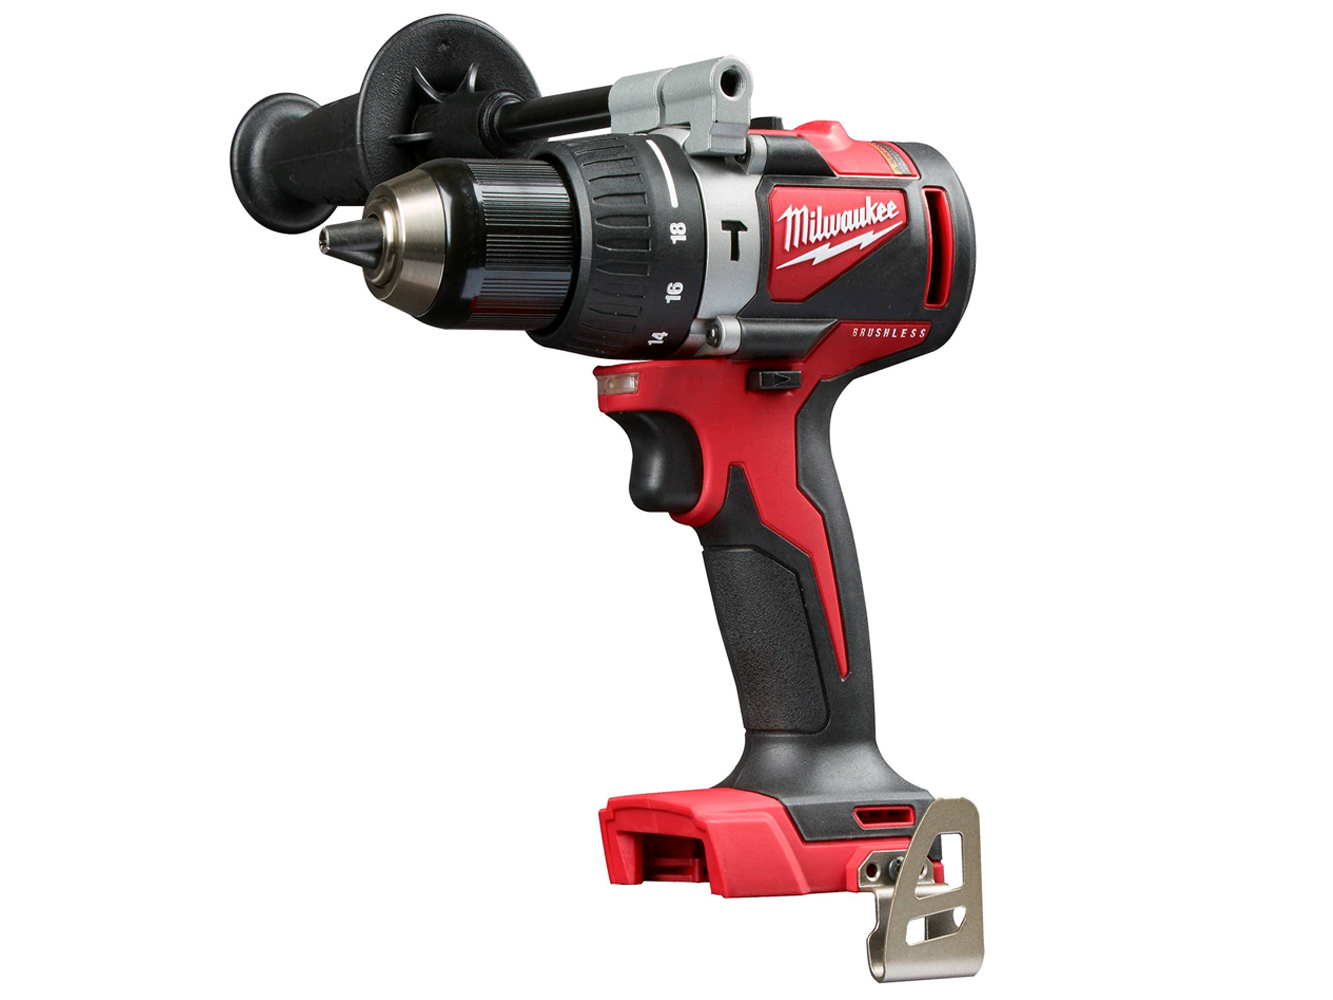 Milwaukee M18BLPD2 18V Brushless Combi Drill (Combi Drill) - Body Only & Case